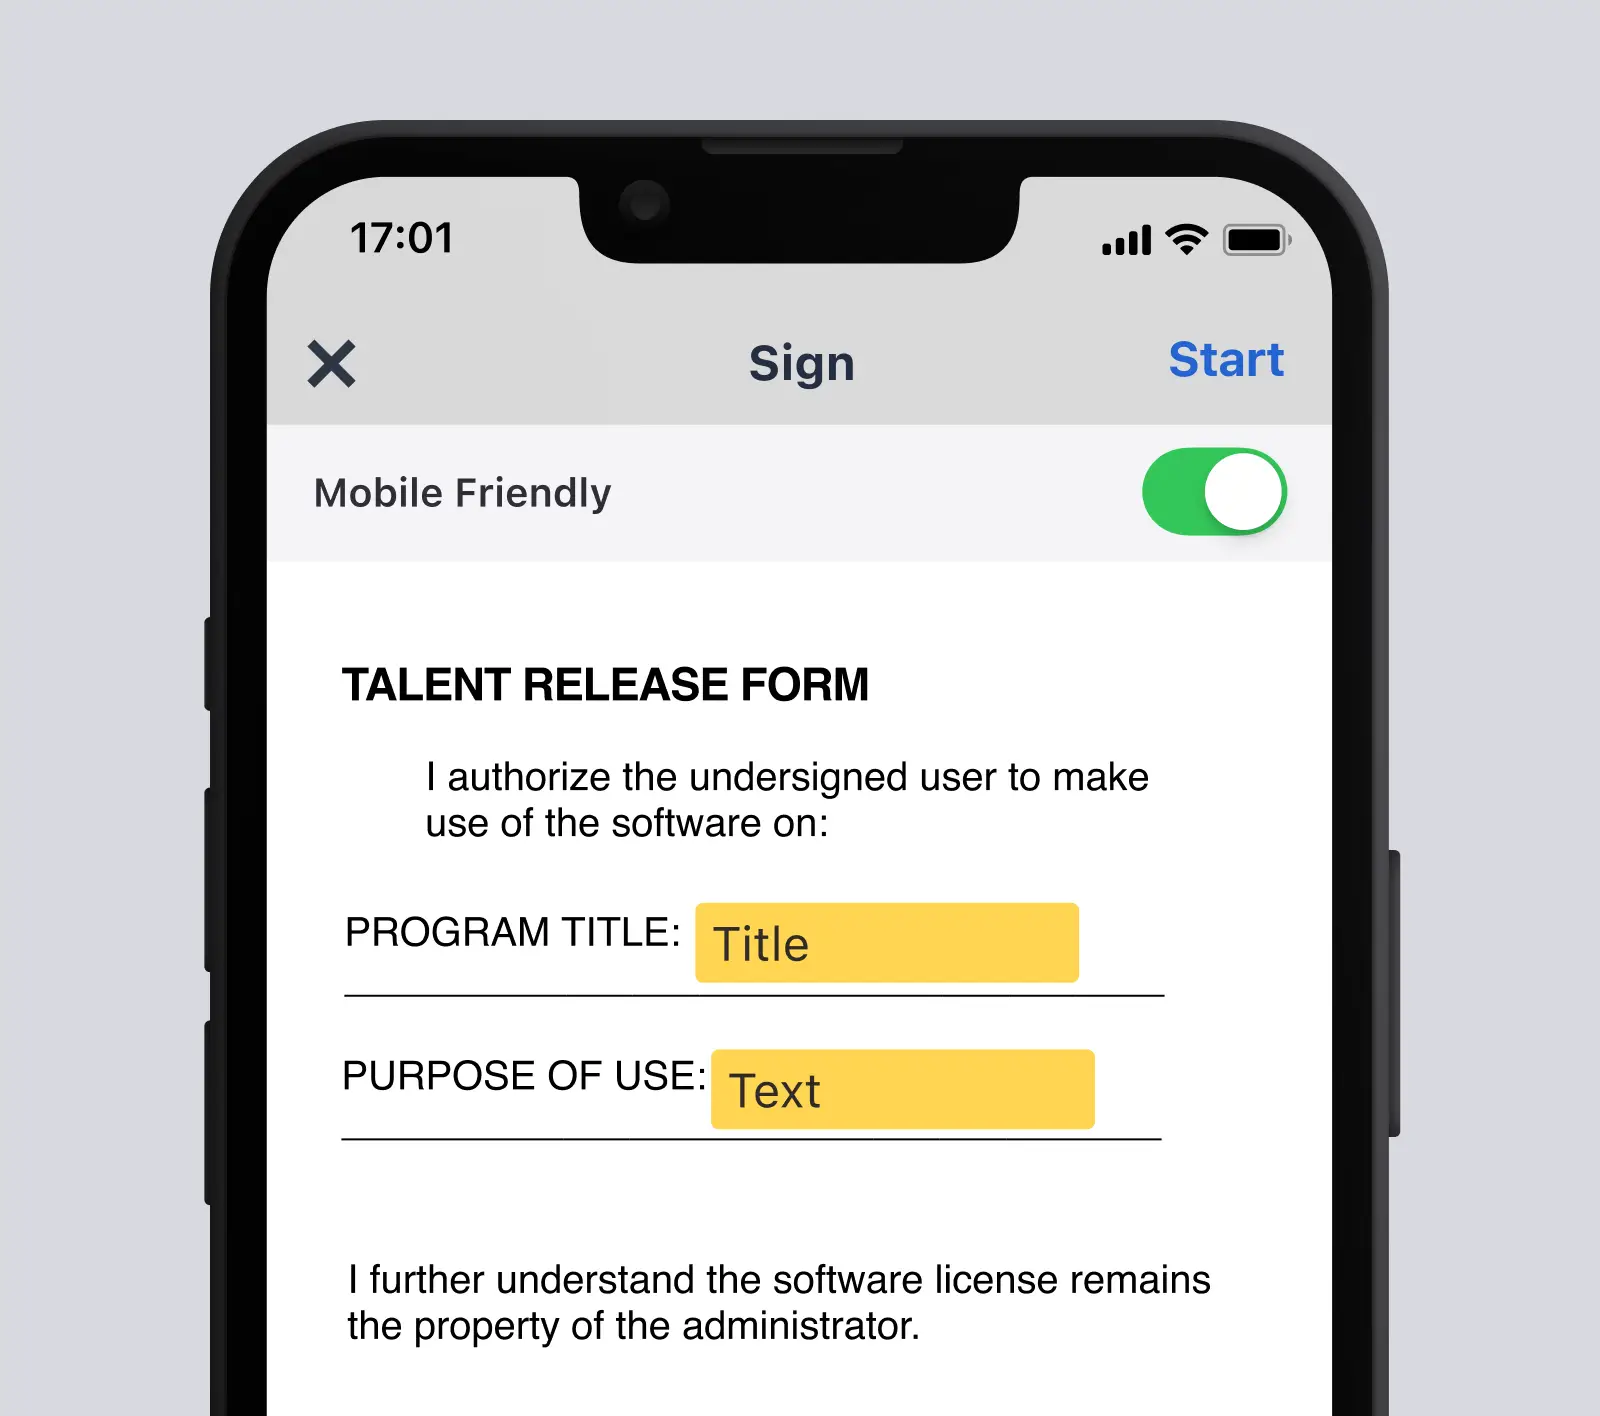 Phone screen showing a talent release form in the DocuSign app with fields for title and text